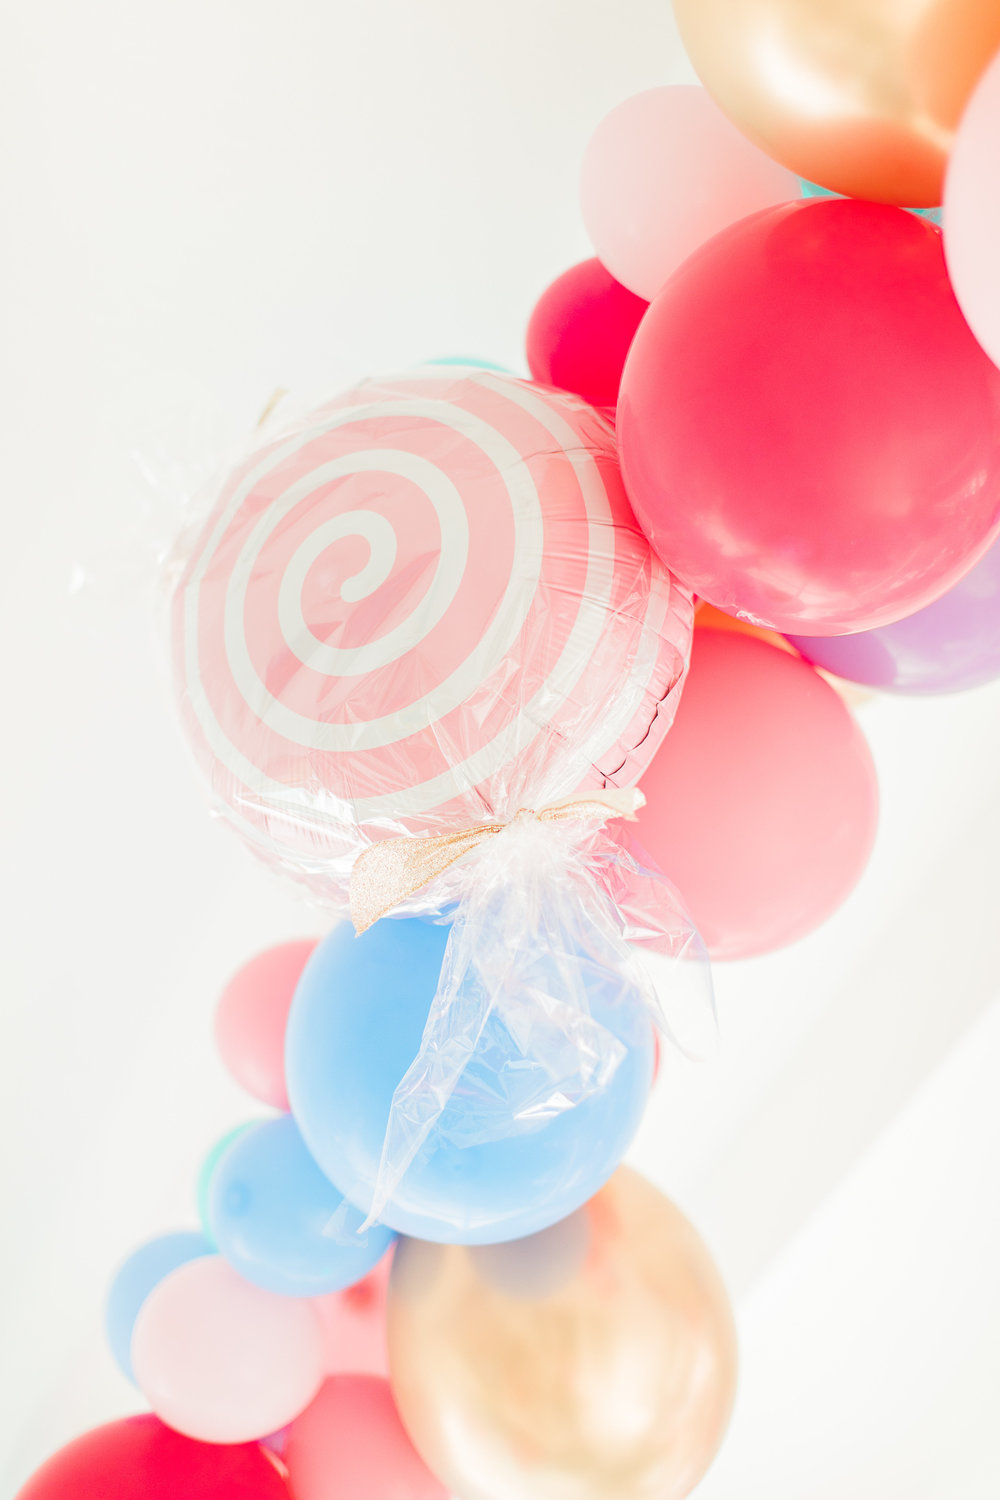 A SWEET CANDY THEMED BIRTHDAY PARTY featured by top Houston party blogger, Cake and Confetti